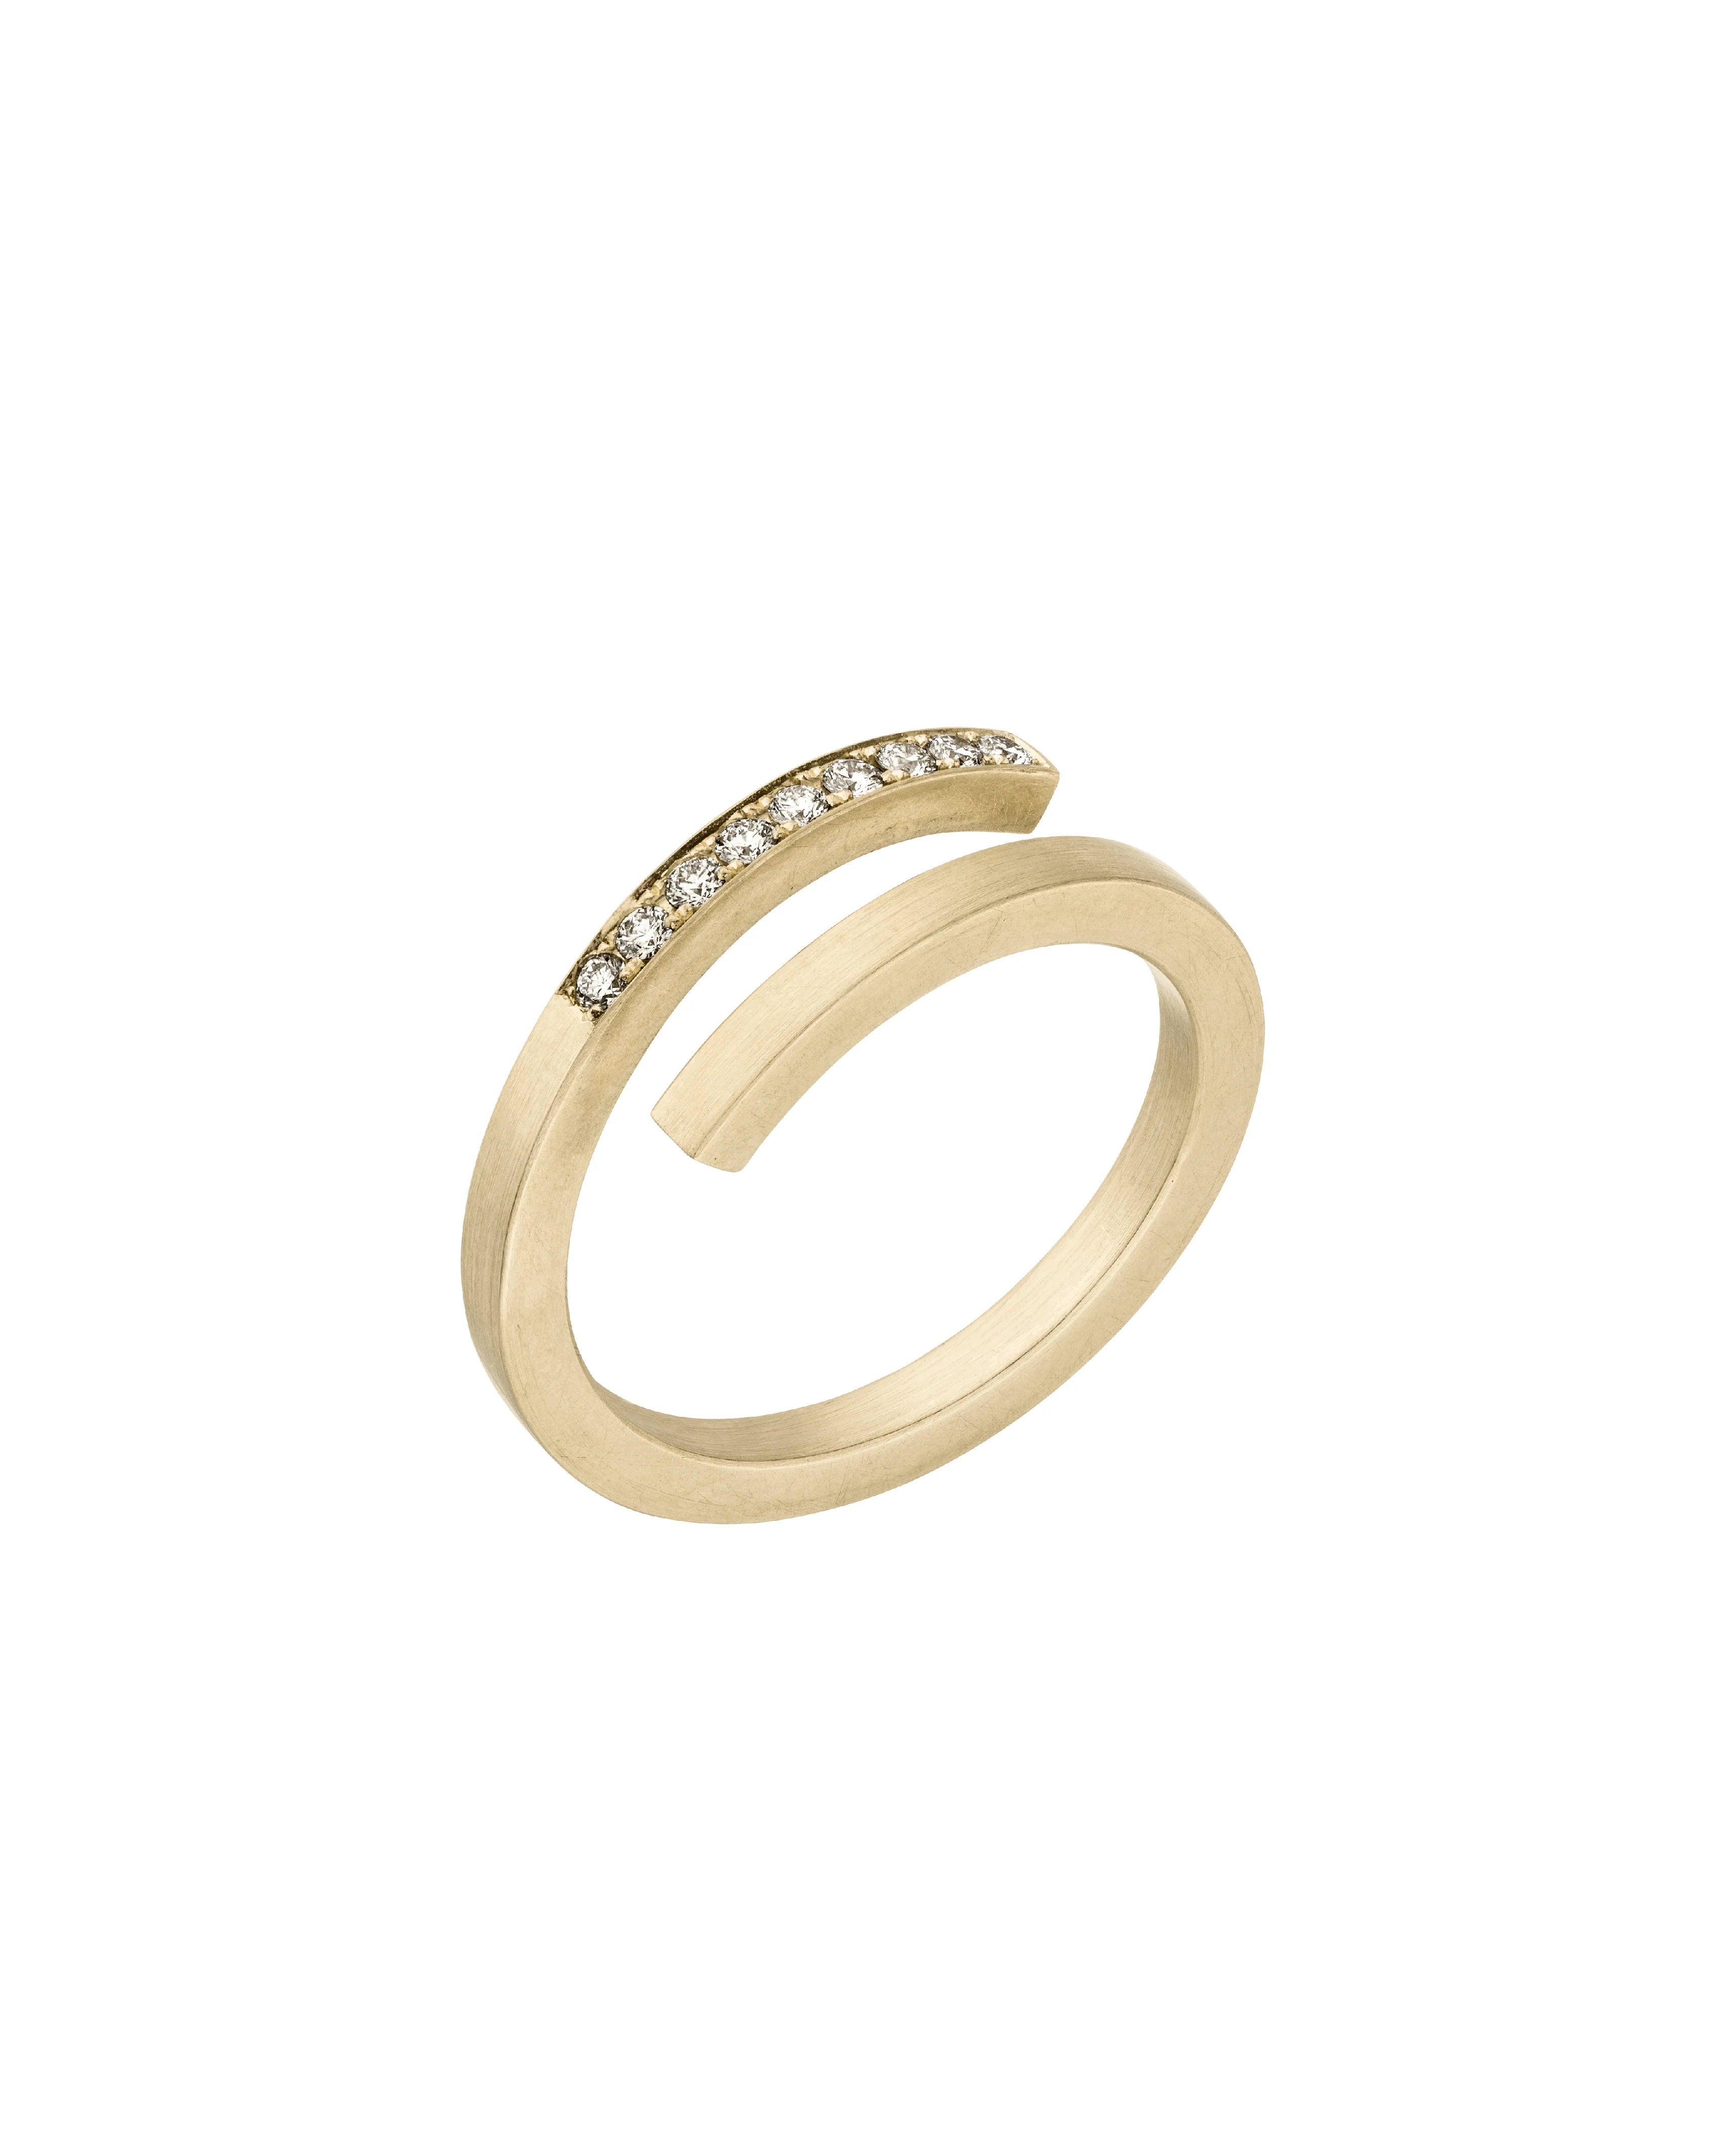 SQUARE - Gold Ring - Gelbgold 585